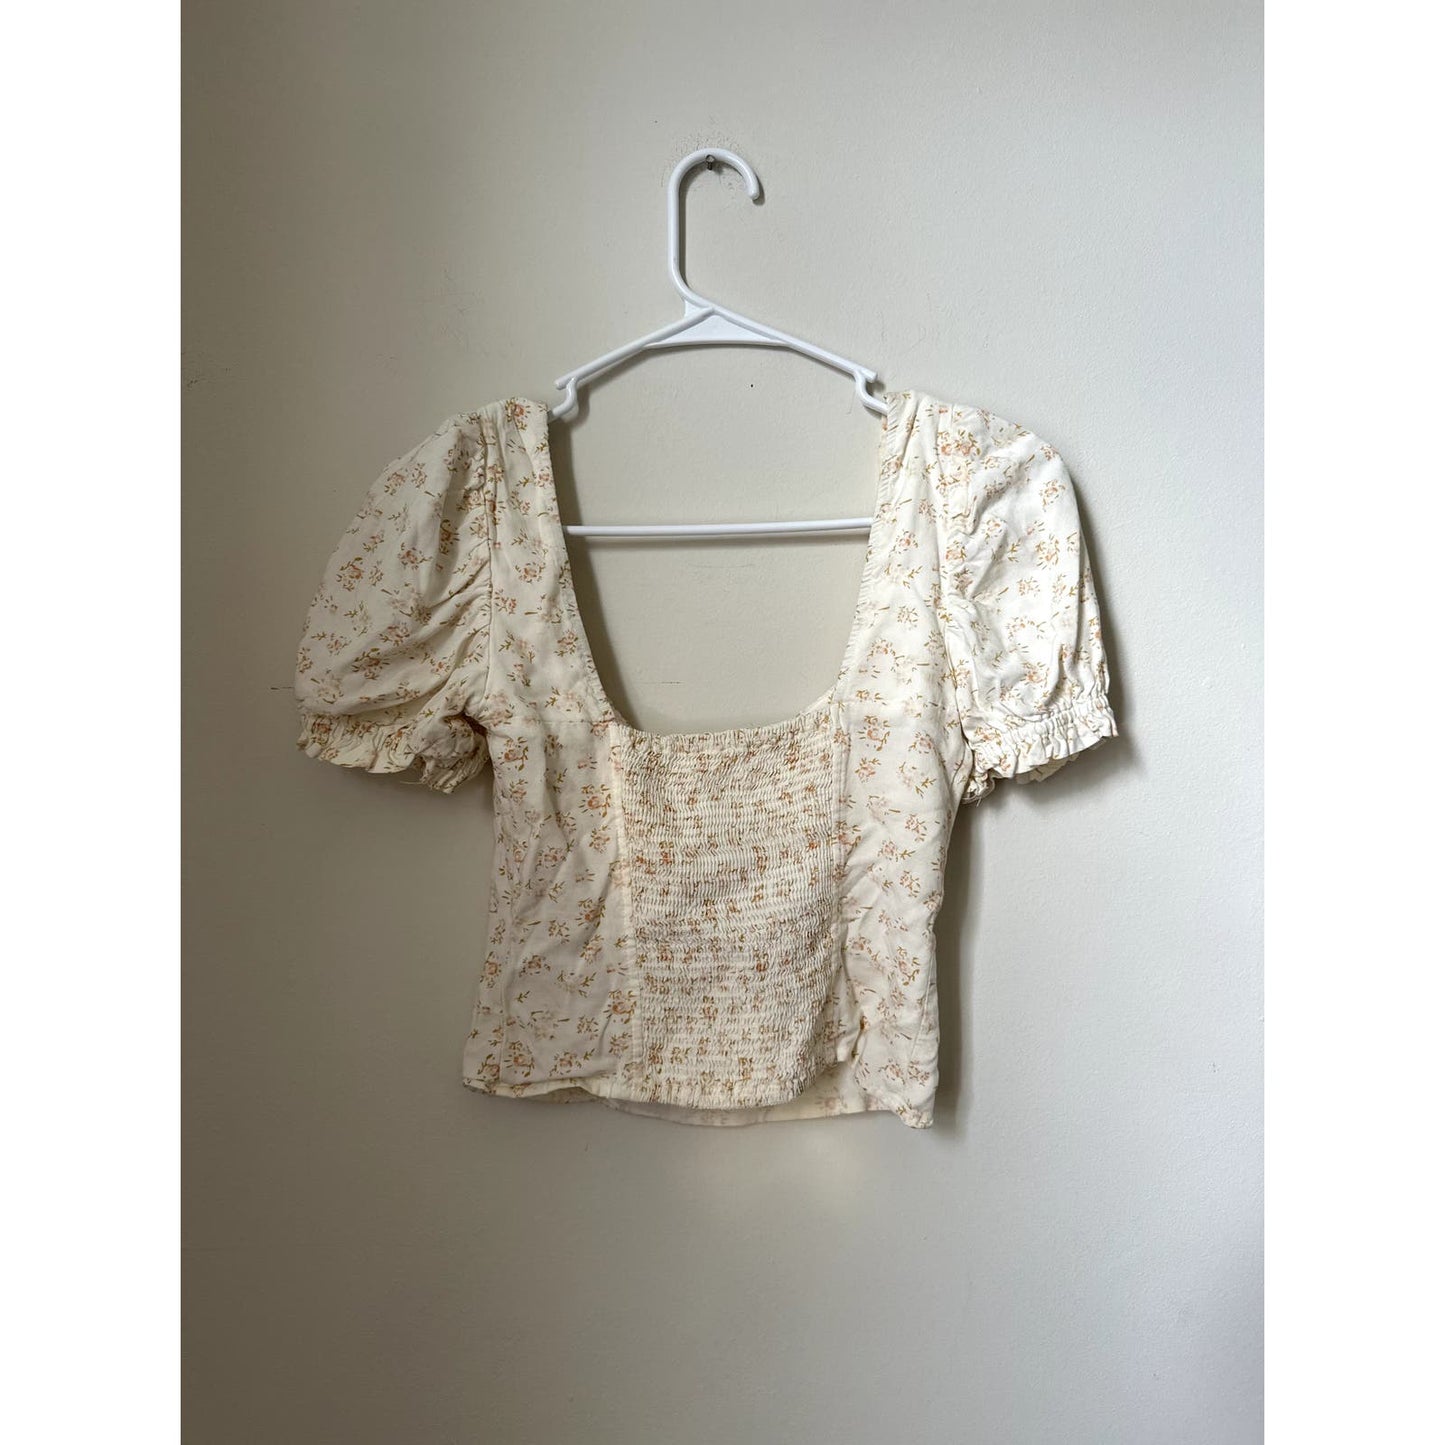 Urban Outfitters Dainty Floral Top, Size Small